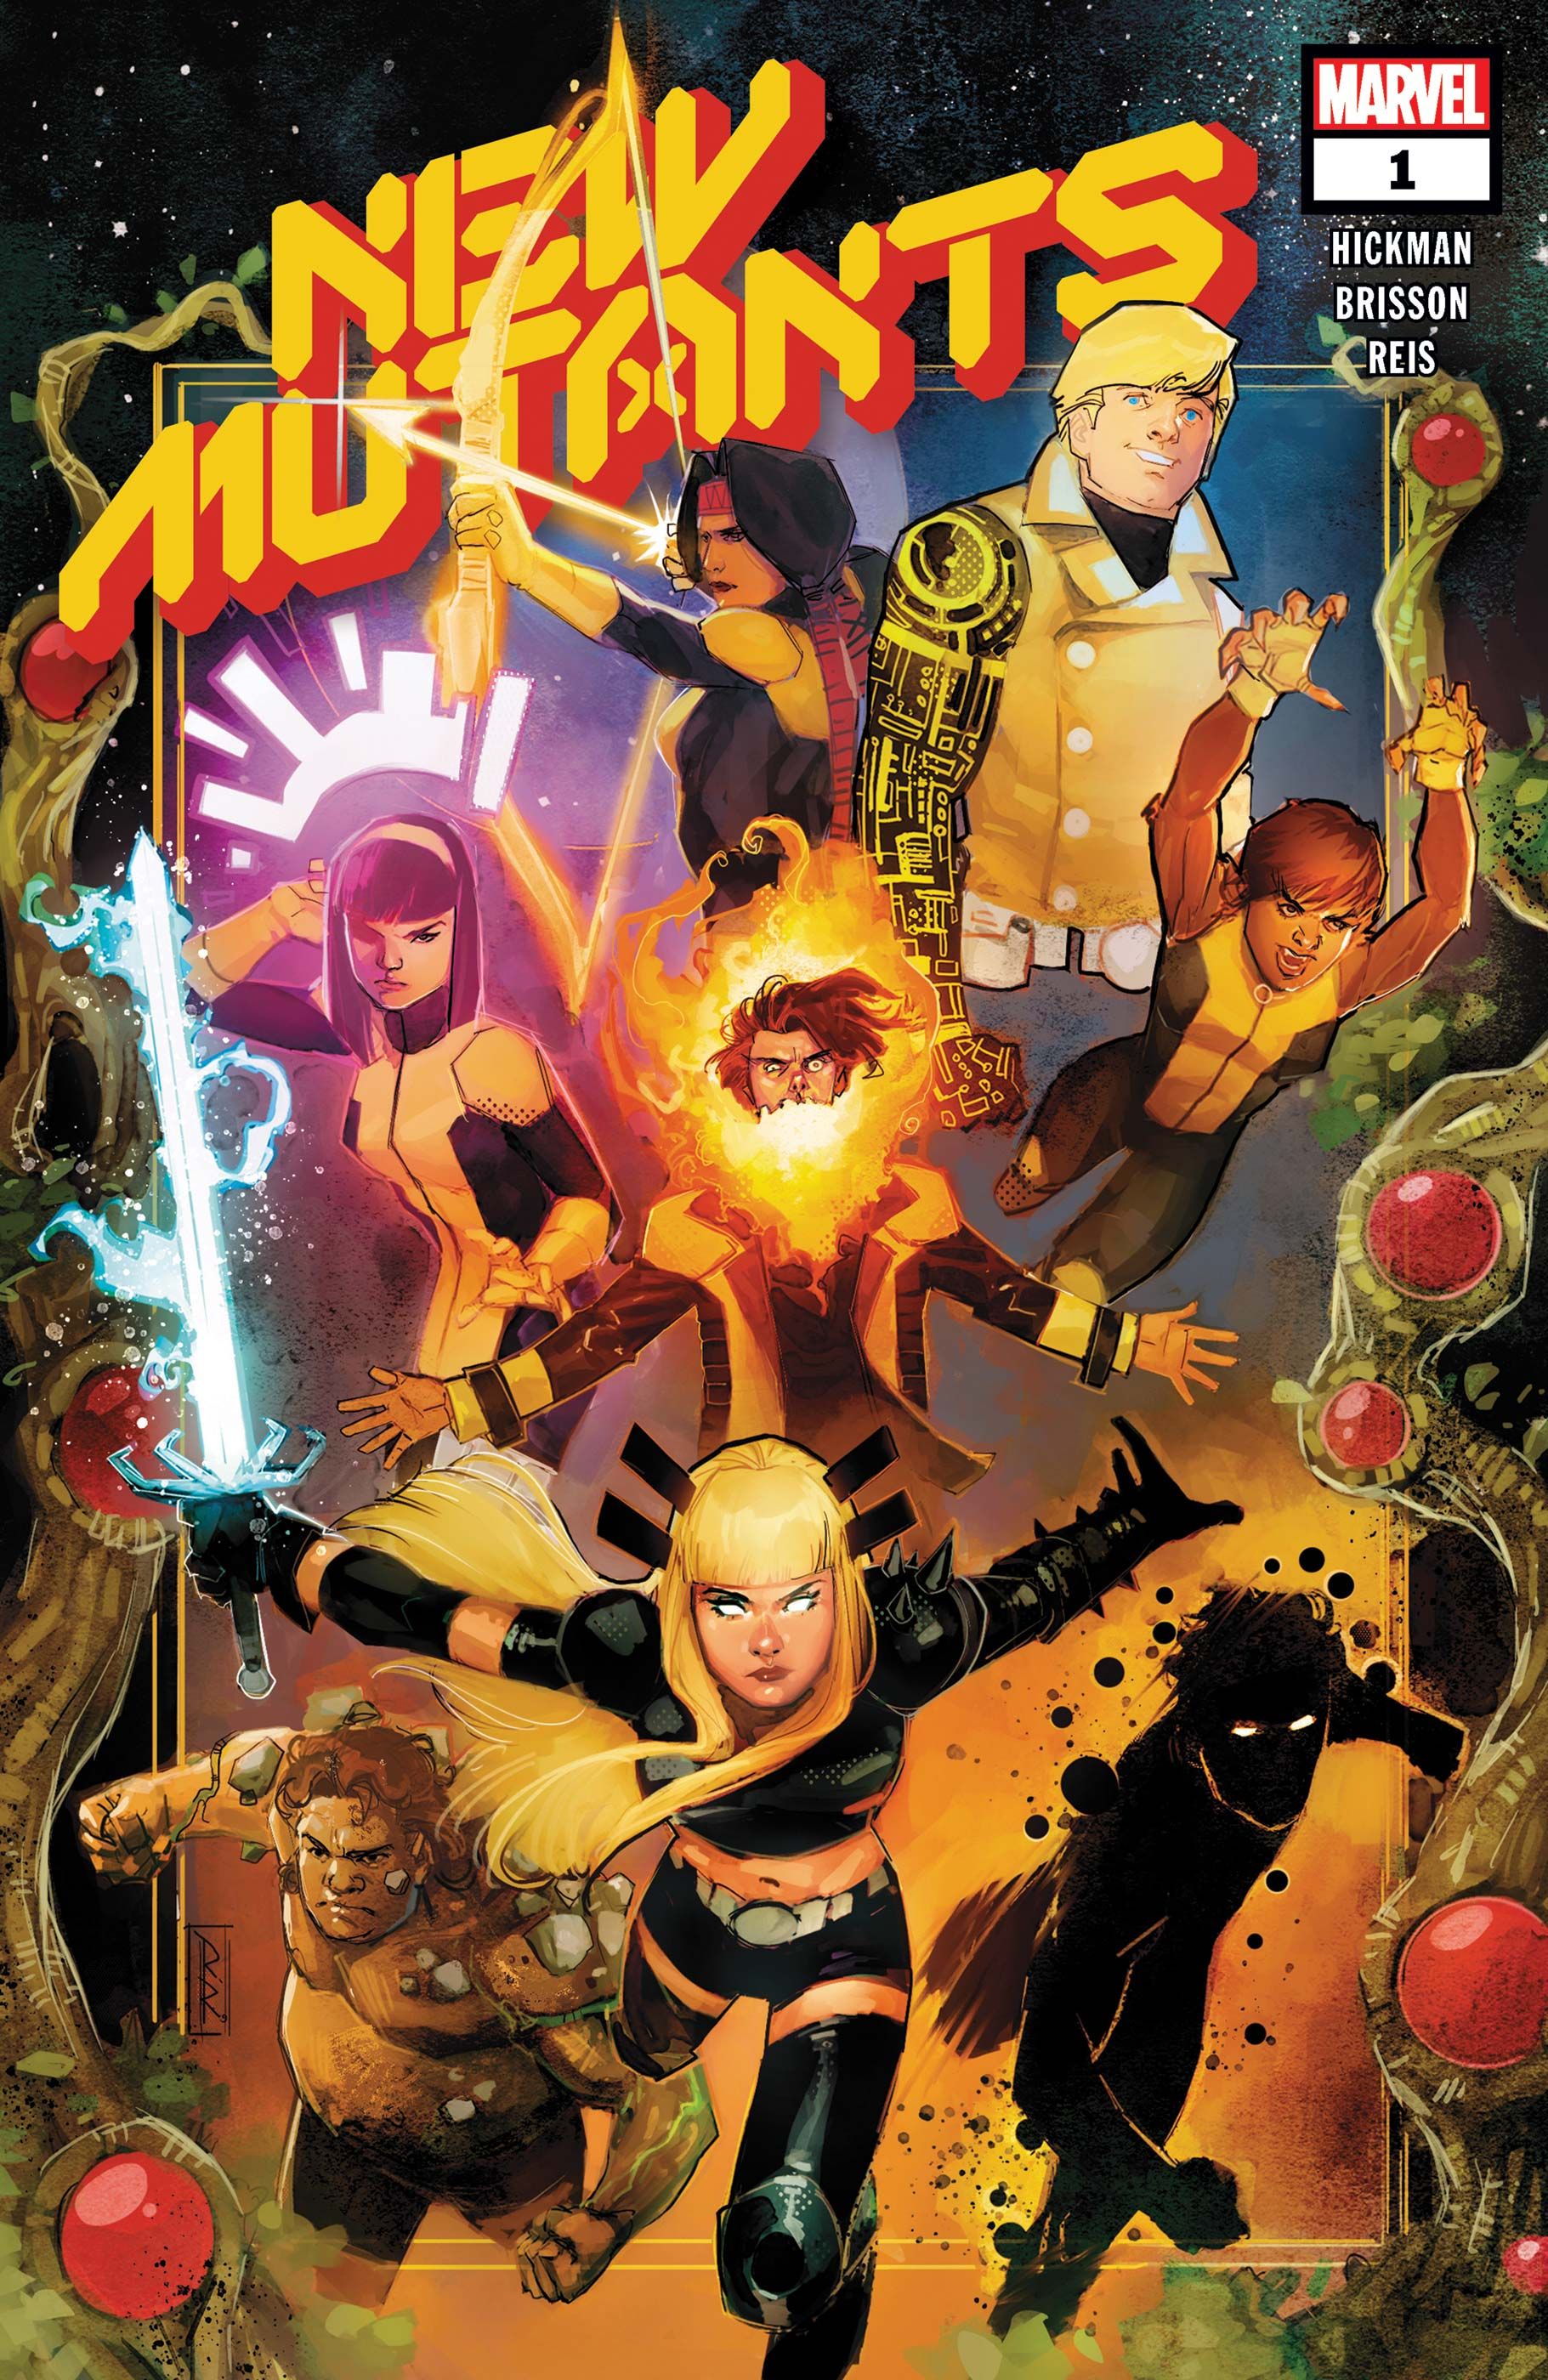 Rod Reis' cover to New Mutants (2019) #1, featuring mutants including Magik, sunspot, Cypher, and more